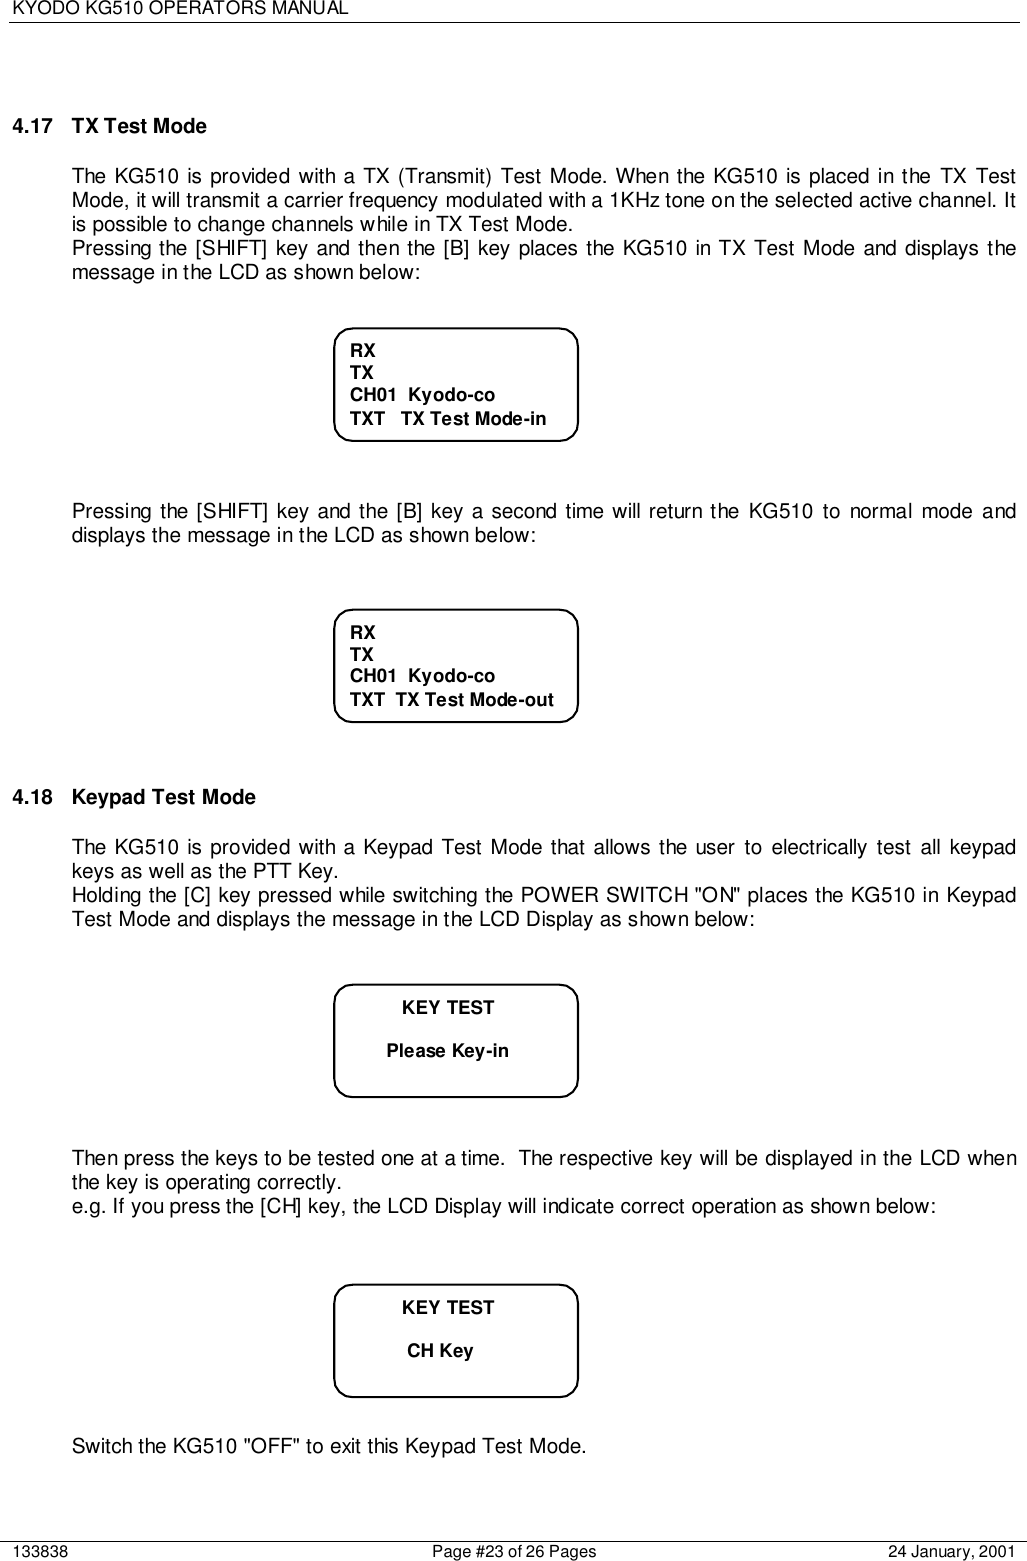 KYODO KG510 OPERATORS MANUAL133838 Page #23 of 26 Pages 24 January, 20014.17  TX Test ModeThe KG510 is provided with a TX (Transmit) Test Mode. When the KG510 is placed in the TX TestMode, it will transmit a carrier frequency modulated with a 1KHz tone on the selected active channel. Itis possible to change channels while in TX Test Mode.Pressing the [SHIFT] key and then the [B] key places the KG510 in TX Test Mode and displays themessage in the LCD as shown below:Pressing the [SHIFT] key and the [B] key a second time will return the KG510 to normal mode anddisplays the message in the LCD as shown below:4.18  Keypad Test ModeThe KG510 is provided with a Keypad Test Mode that allows the user to electrically test all keypadkeys as well as the PTT Key.Holding the [C] key pressed while switching the POWER SWITCH &quot;ON&quot; places the KG510 in KeypadTest Mode and displays the message in the LCD Display as shown below:Then press the keys to be tested one at a time.  The respective key will be displayed in the LCD whenthe key is operating correctly.e.g. If you press the [CH] key, the LCD Display will indicate correct operation as shown below:Switch the KG510 &quot;OFF&quot; to exit this Keypad Test Mode.RXTXCH01  Kyodo-coTXT   TX Test Mode-inRXTXCH01  Kyodo-coTXT  TX Test Mode-out          KEY TEST       Please Key-in          KEY TEST           CH Key